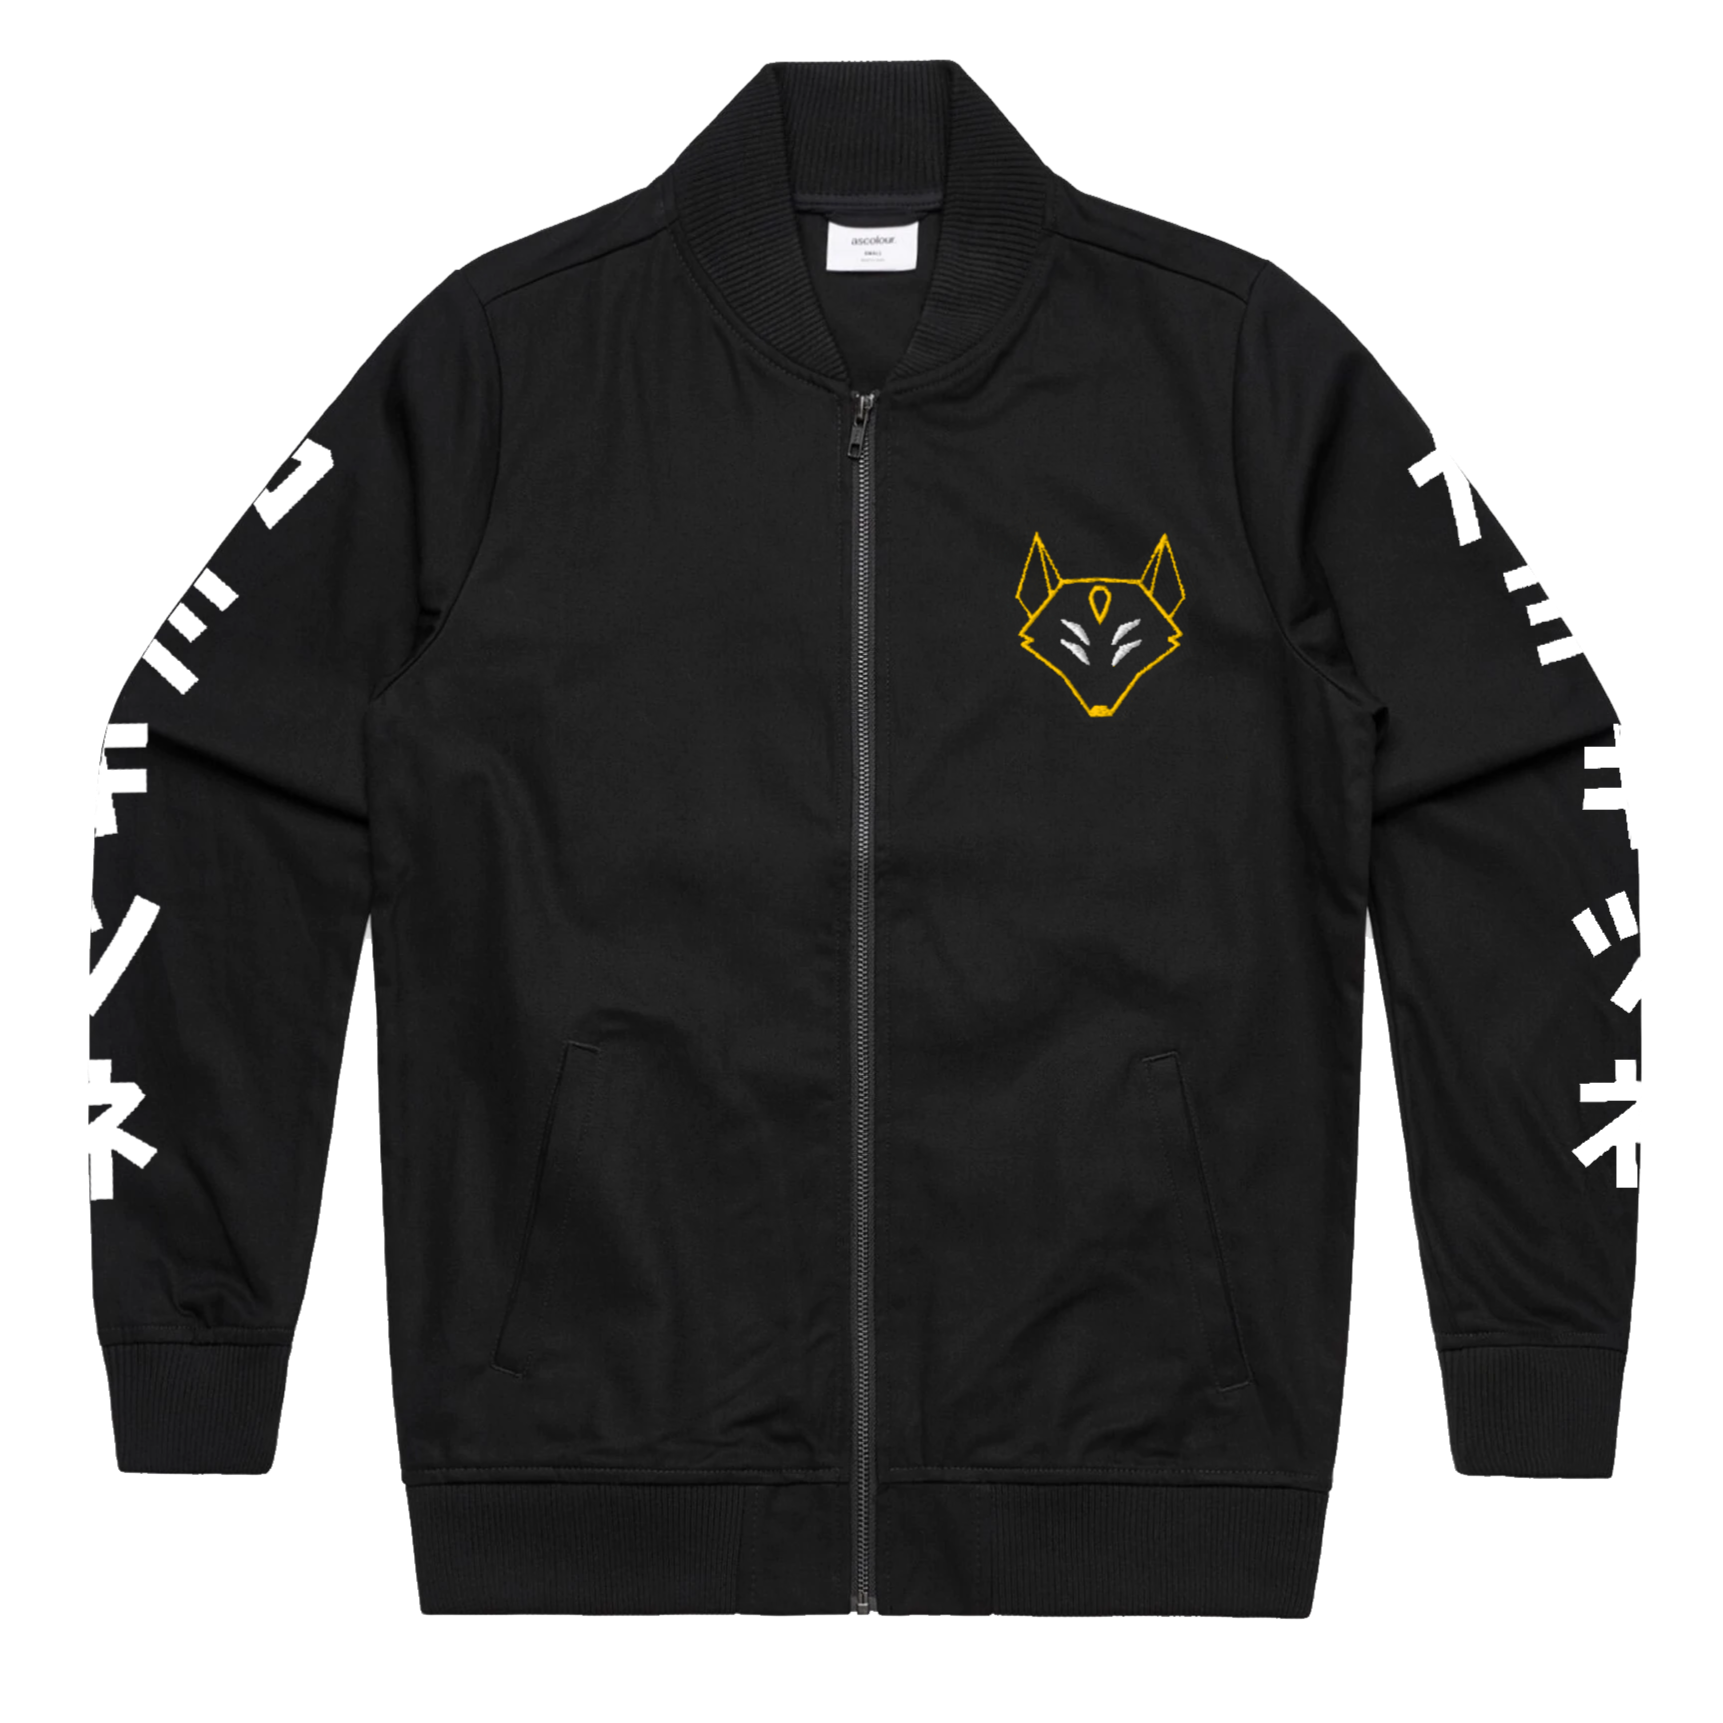 CYBER KITSUNE BOMBER JACKET  [ M --> 2XL ] LIMITED RELEASE